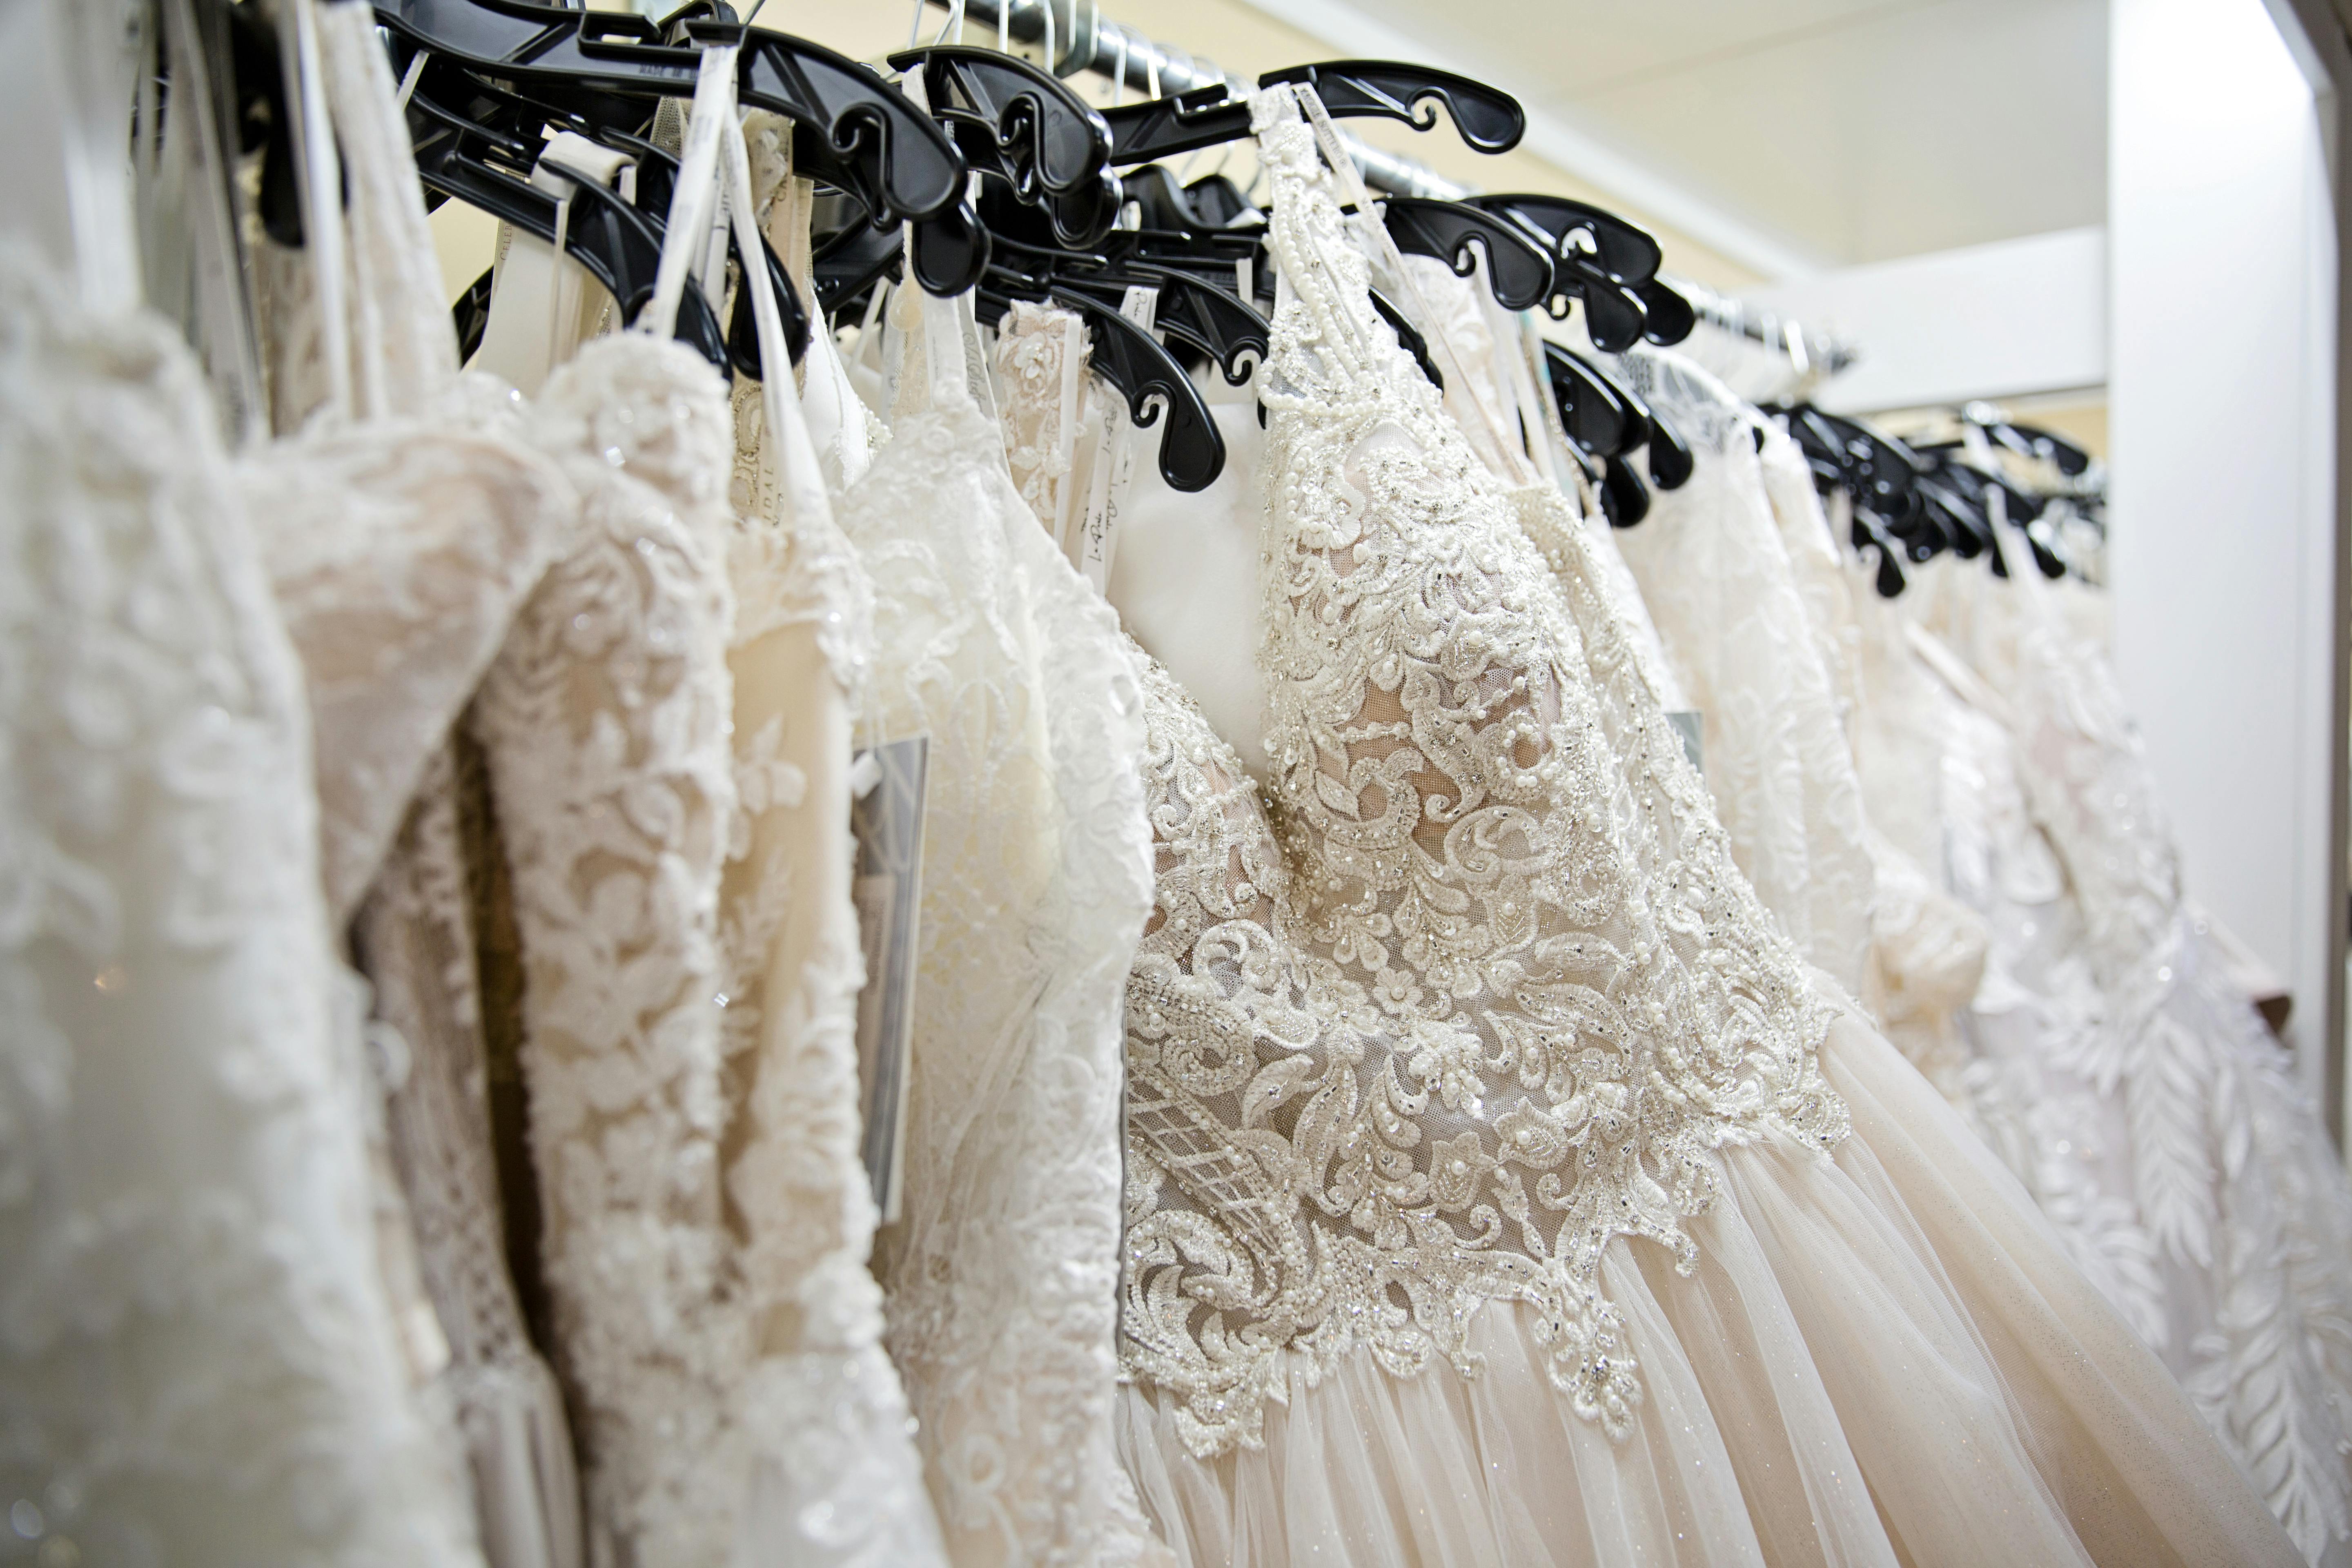 A rack containing wedding dresses | Source: Pexels